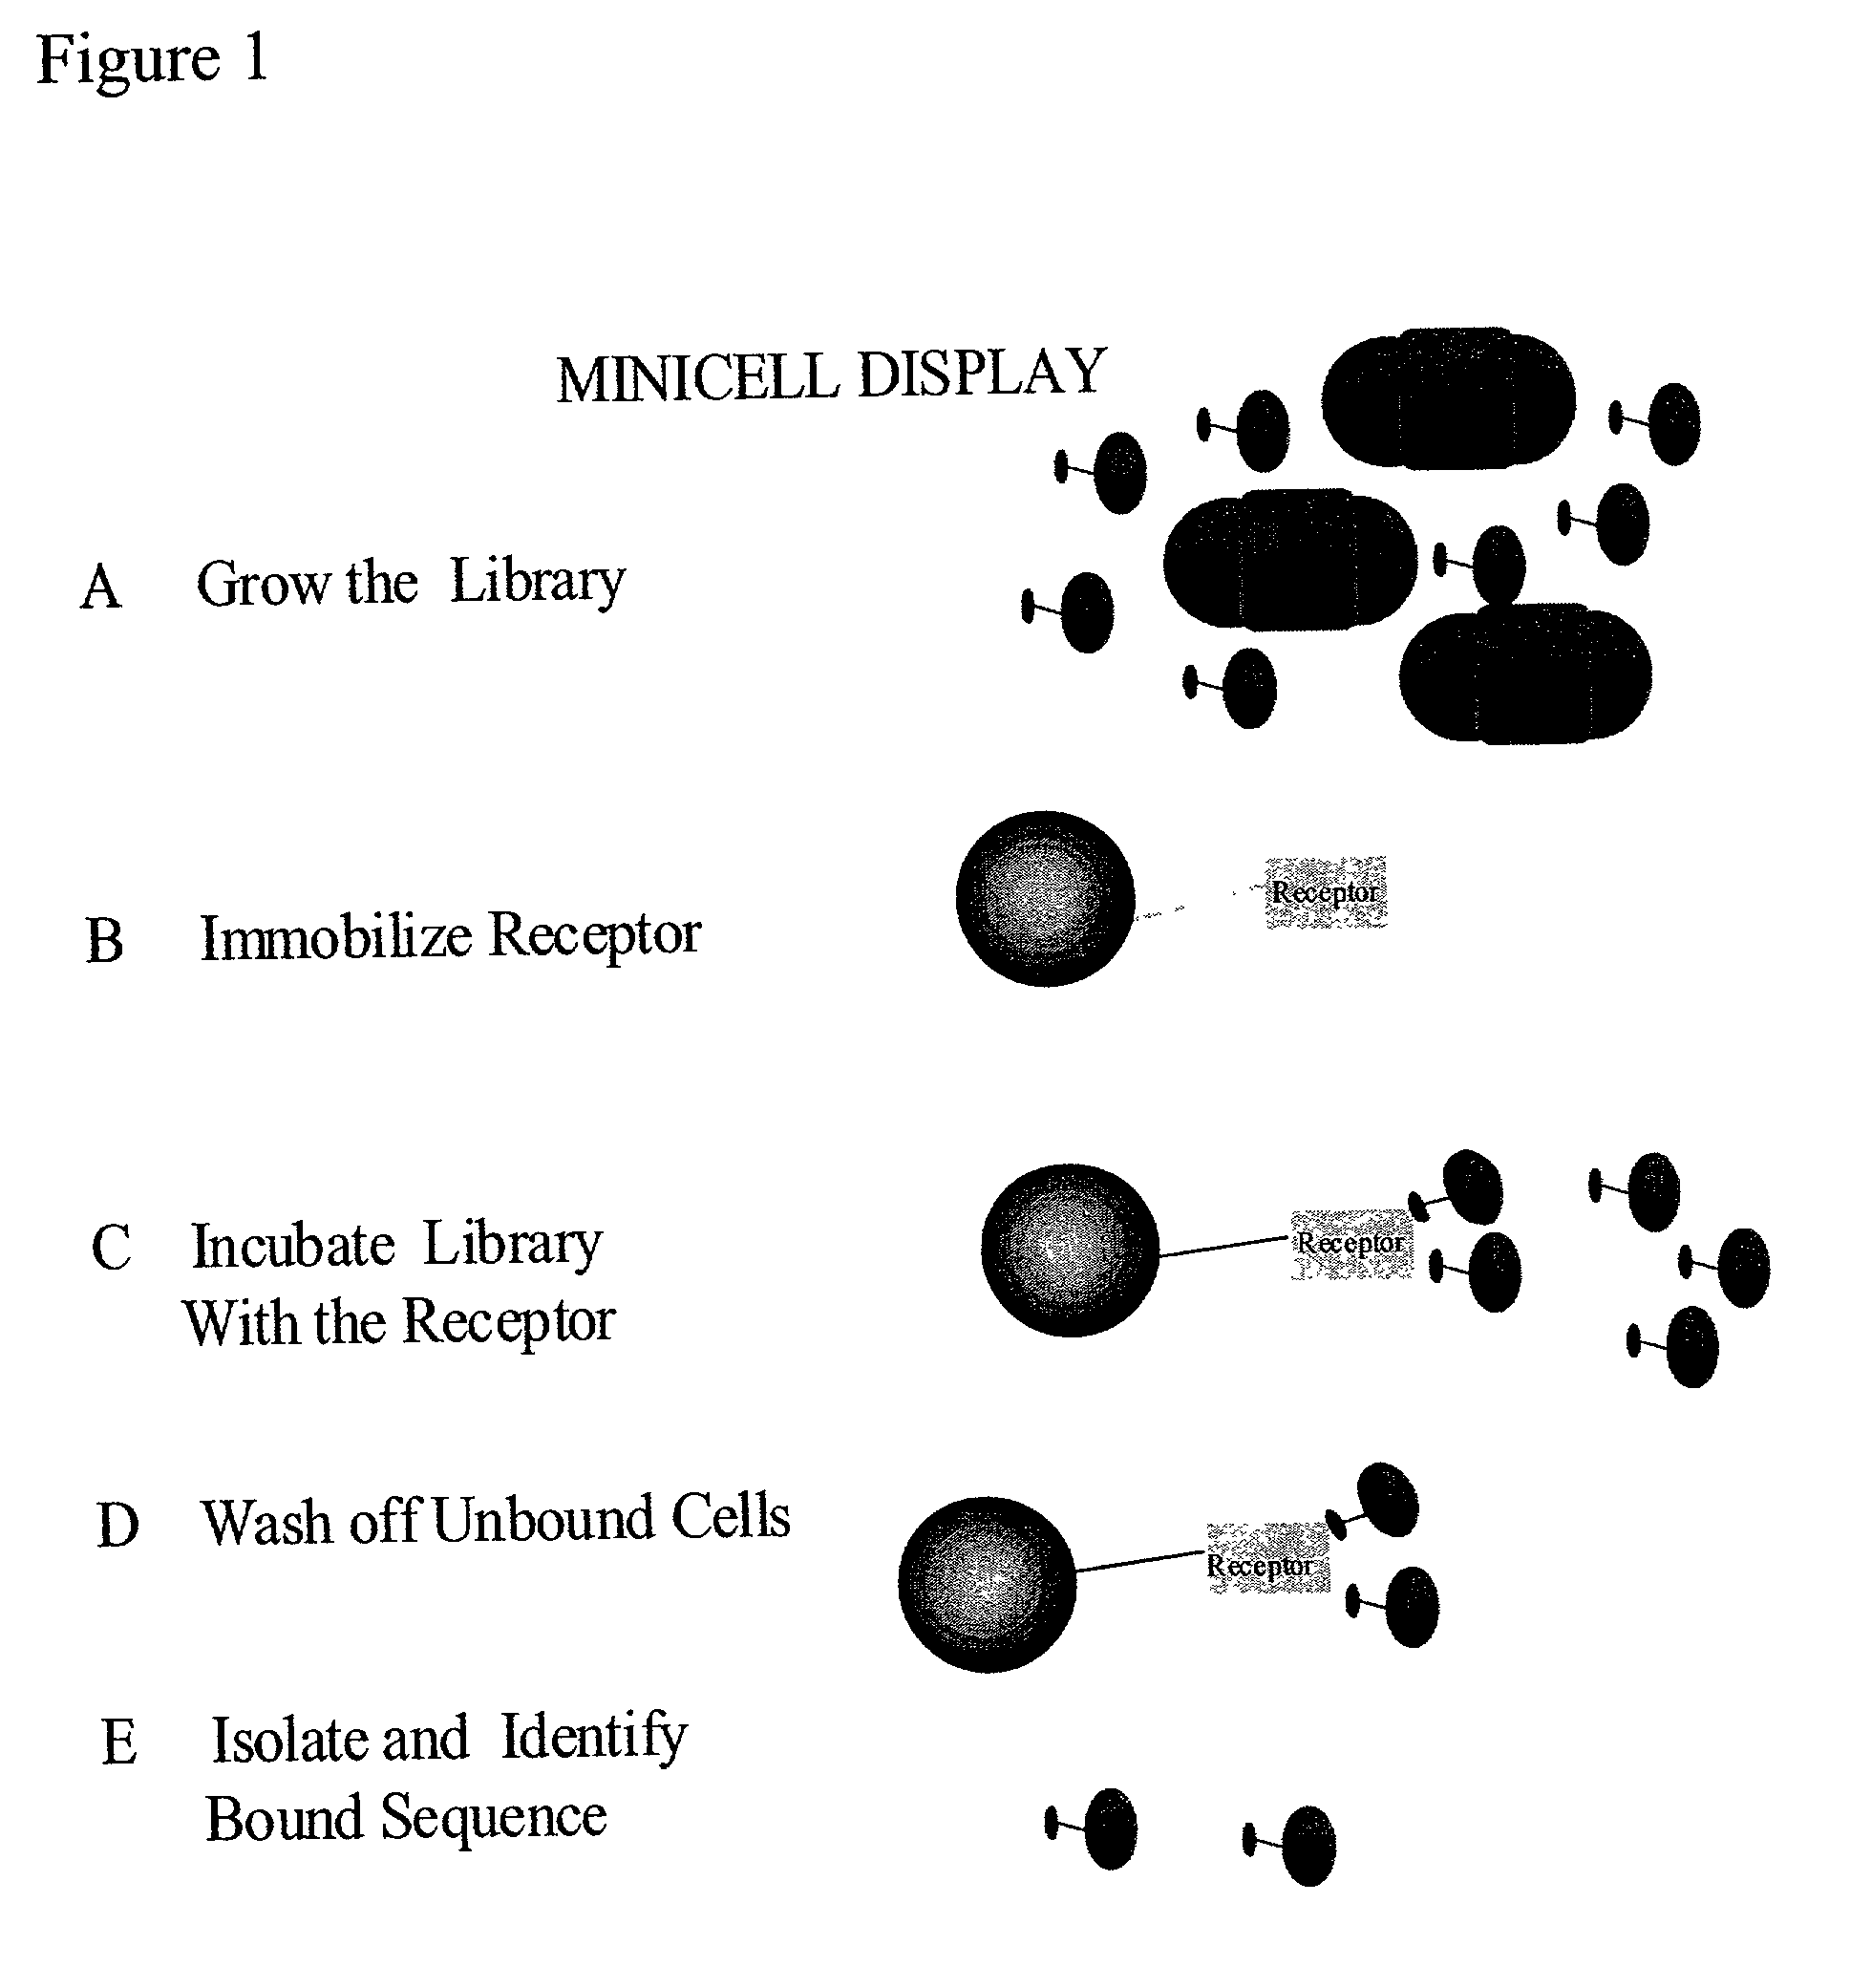 Methods to screen peptide libraries using minicell display